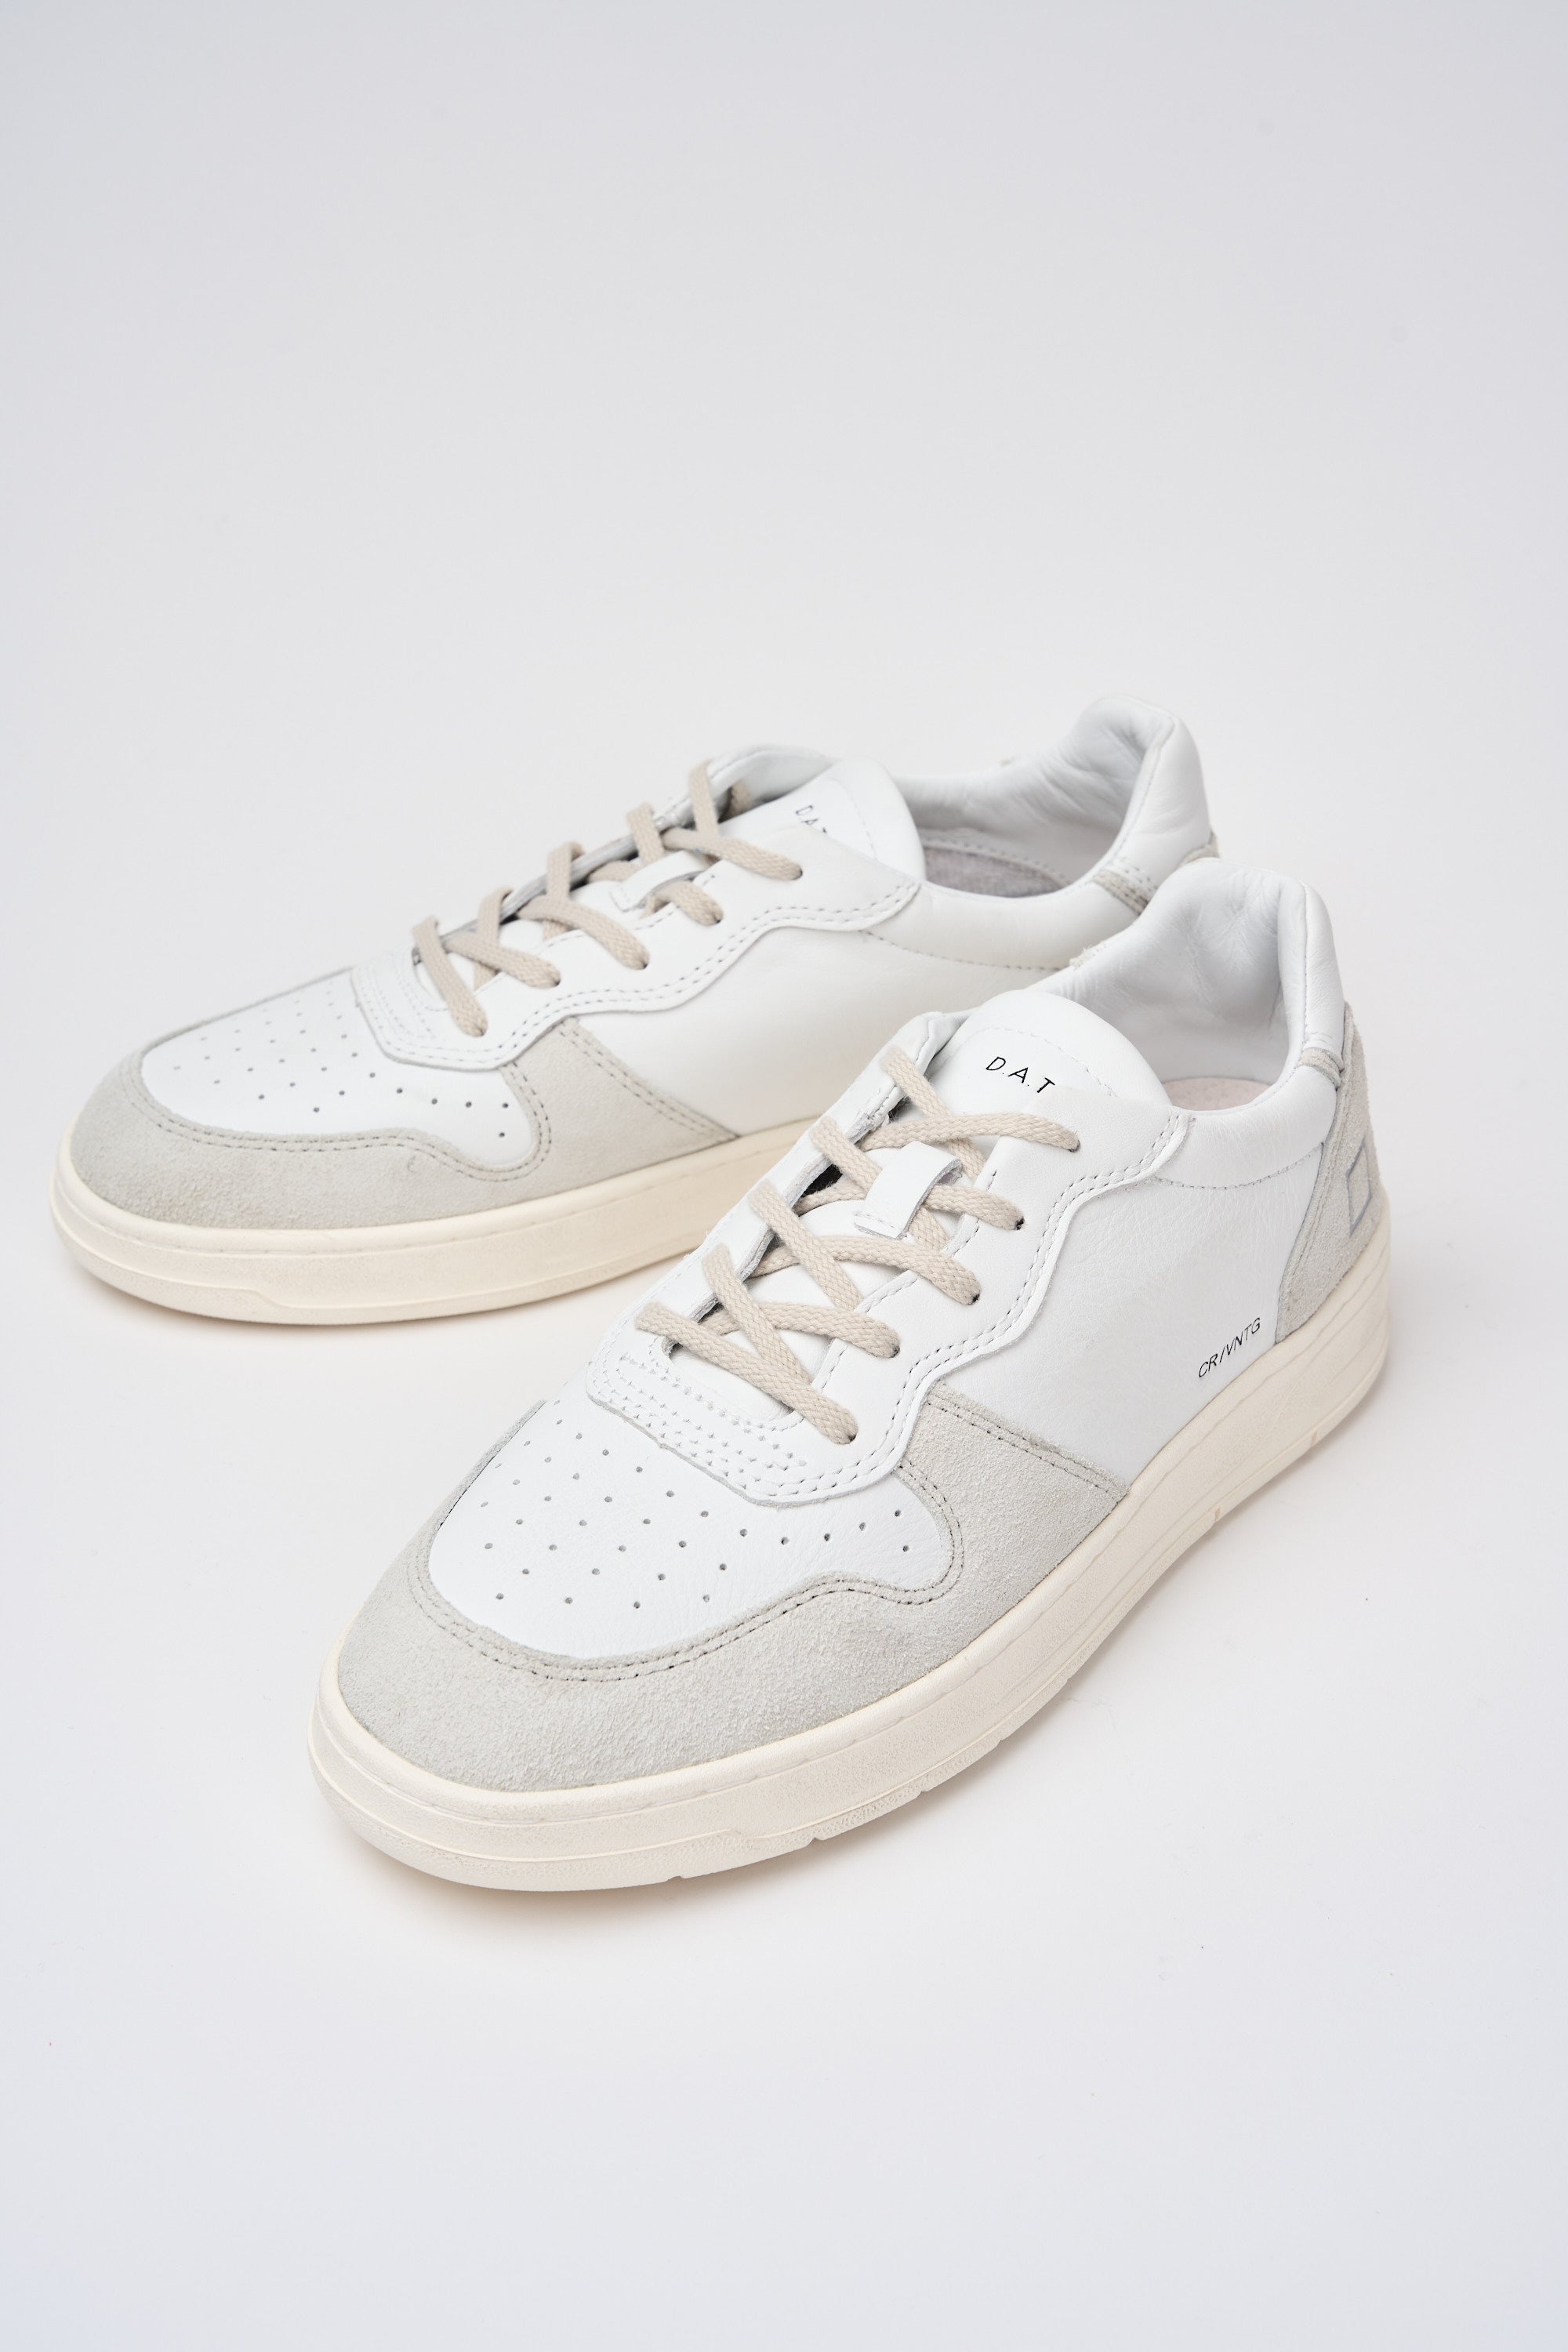 D.A.T.E. Court Vintage Leather/Suede White Sneakers-7